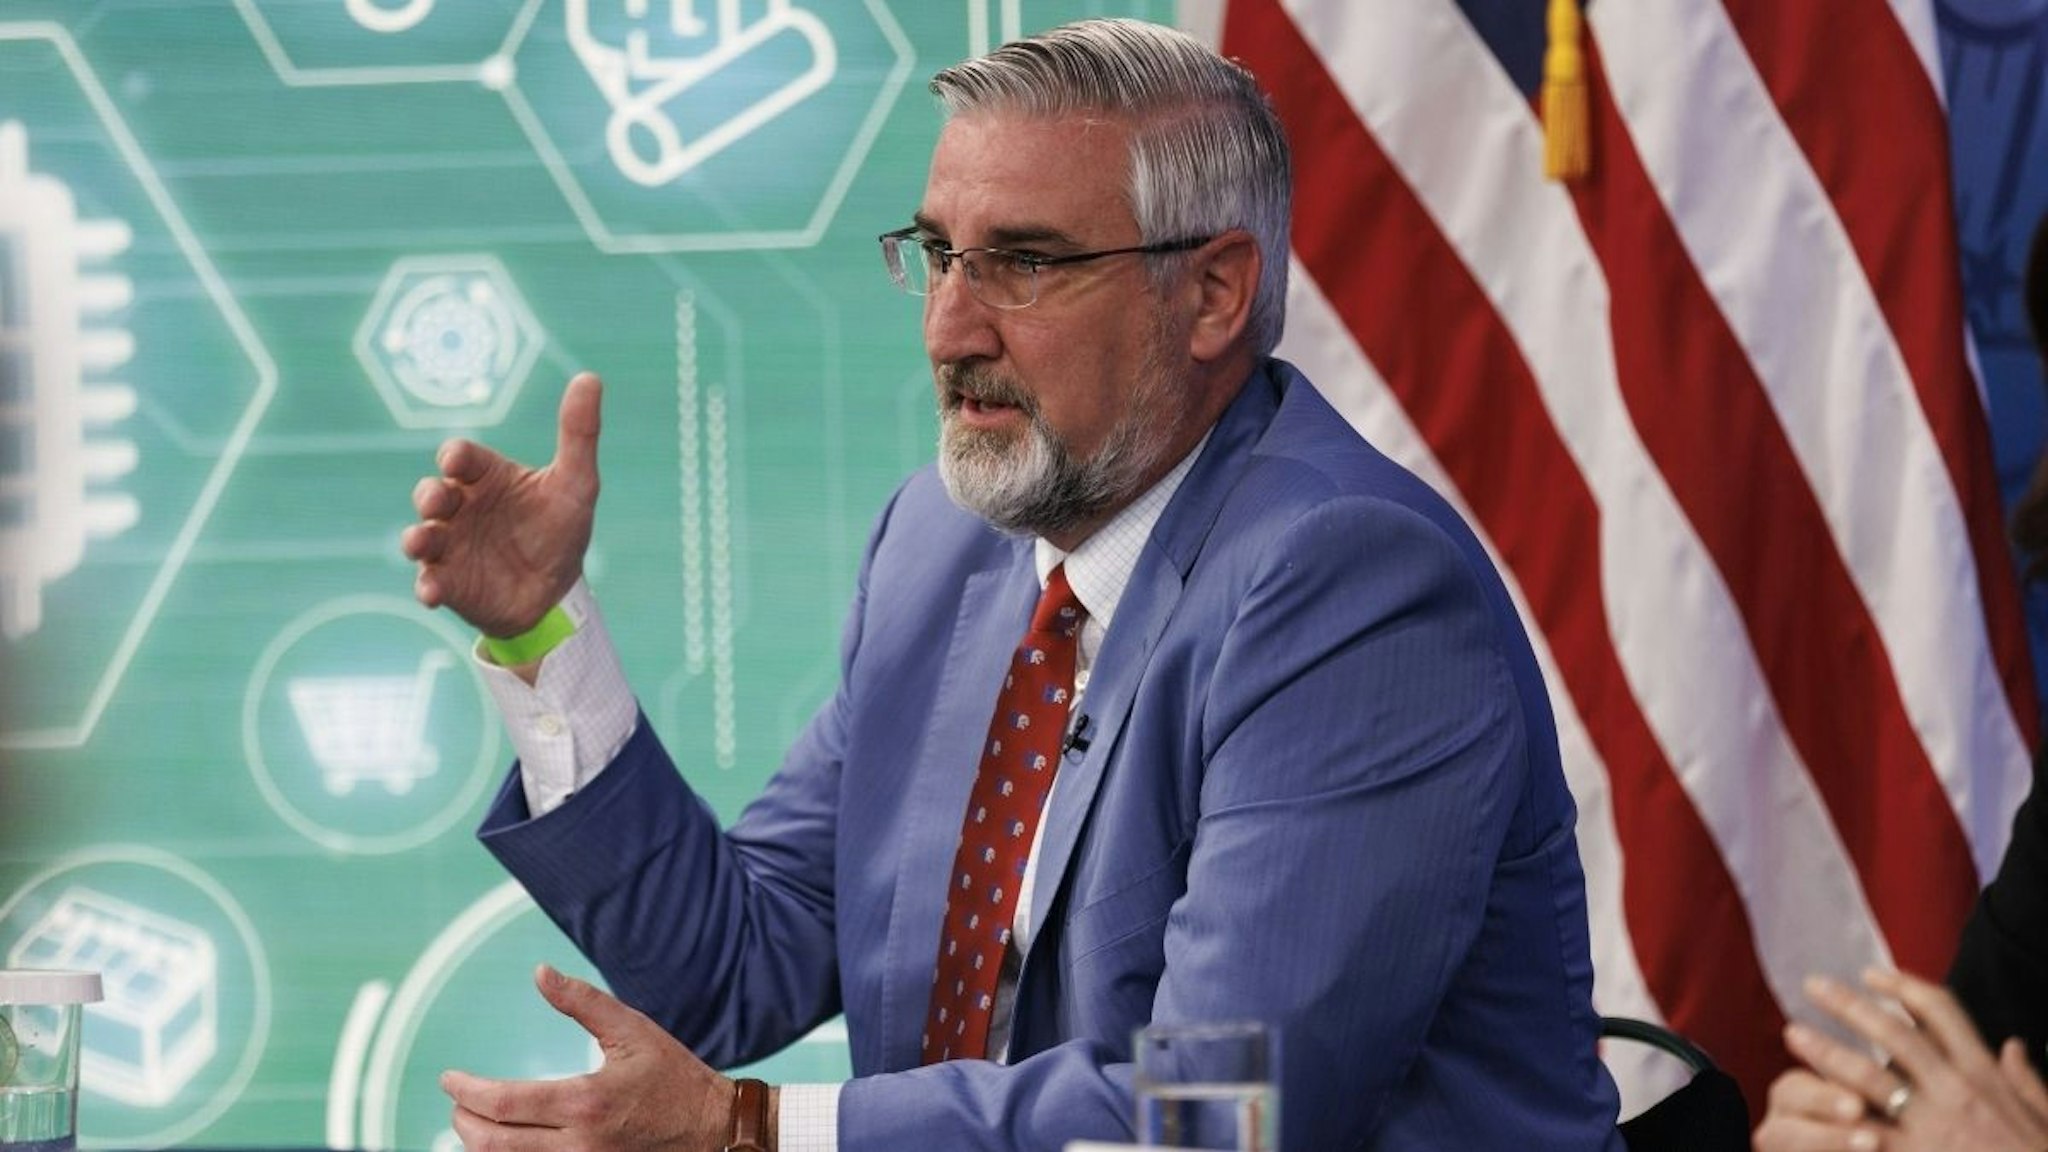 Eric Holcomb, governor of Indiana, speaks during a meeting with U.S. President Joe Biden, business leaders and governors in the Eisenhower Executive Office Building in Washington, D.C., U.S., on Wednesday, March 9, 2022.